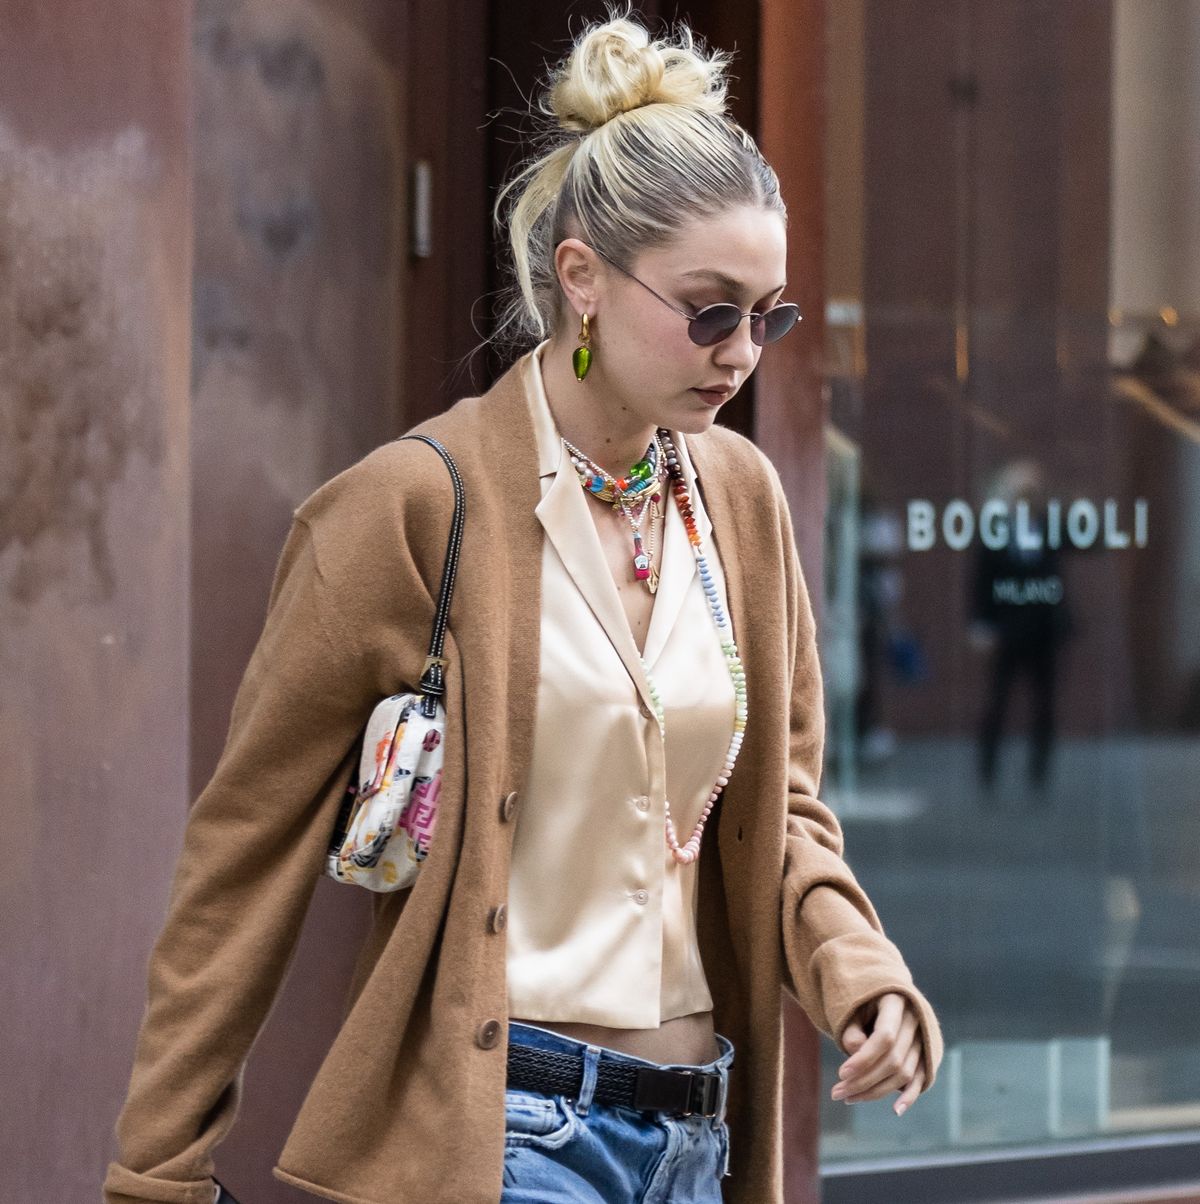 Gigi Hadid Wears a Cozy Cardigan and Colorful Accessories in NYC